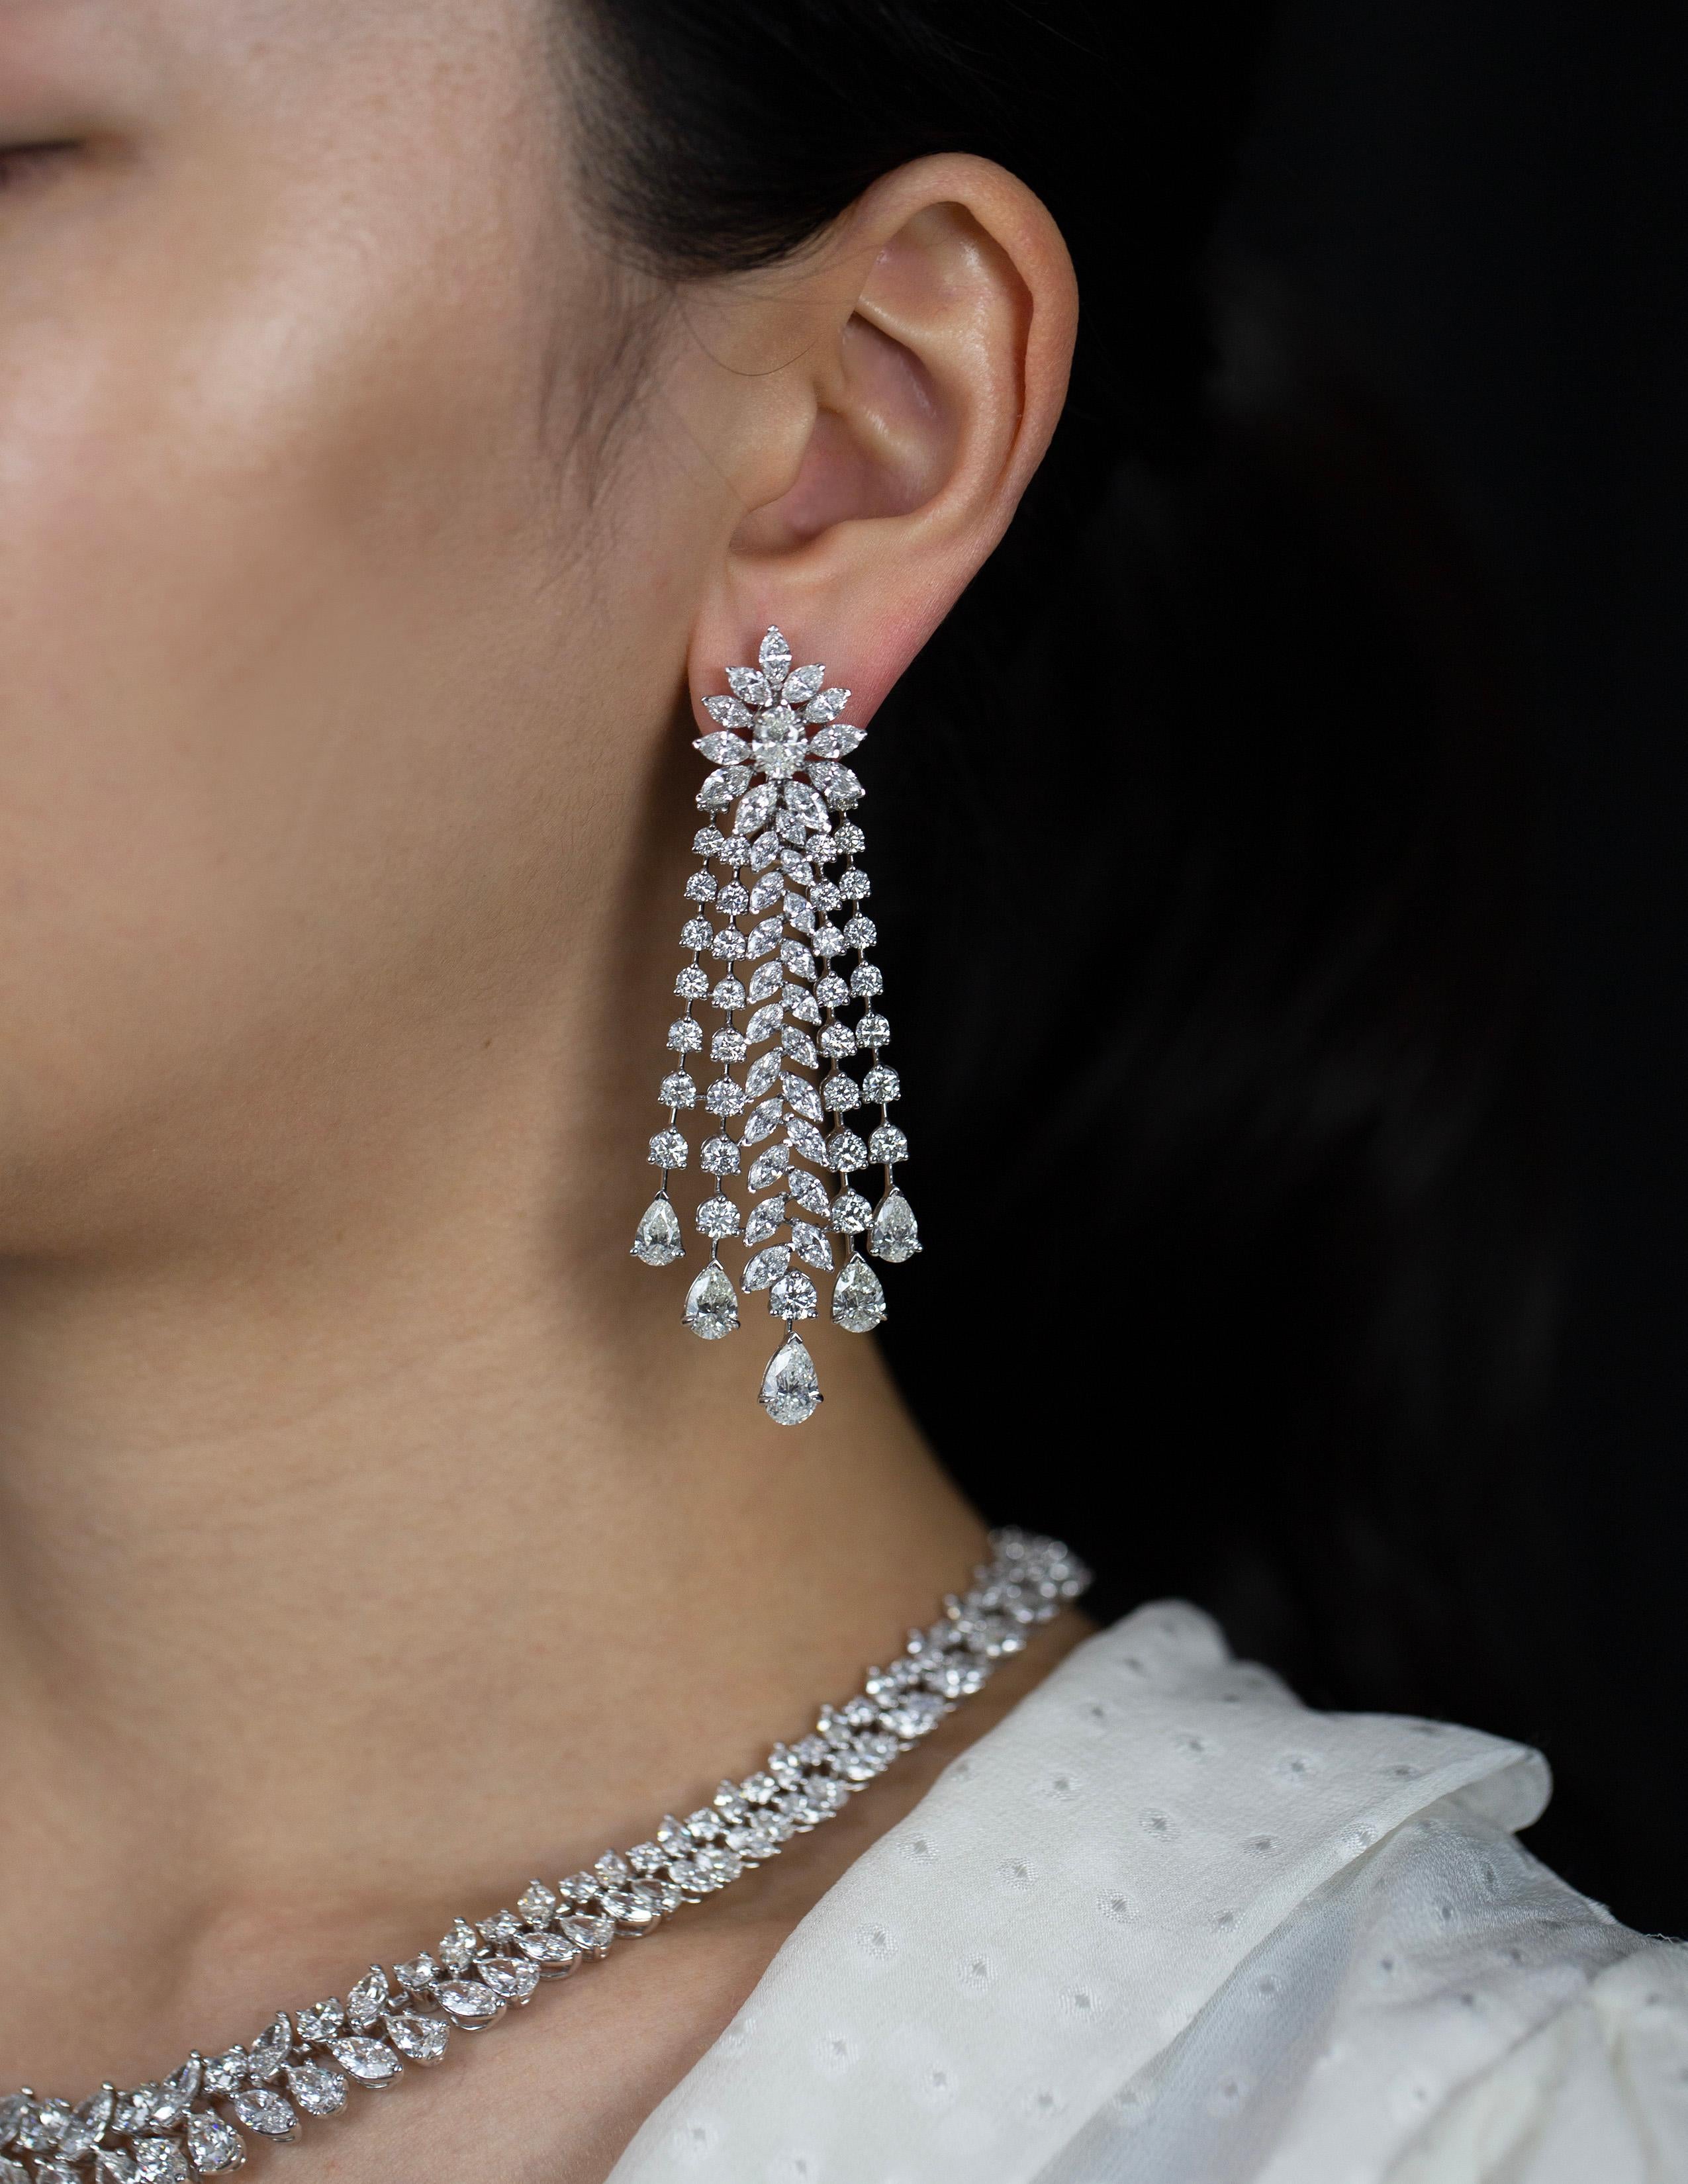 Elegantly made chandelier earrings featuring 140 pieces mixed brilliant round, pear, marquise shape diamonds weighing 27.01 carats total. Set in an intricate and sophisticated fringe chandelier design made in 18k white gold.